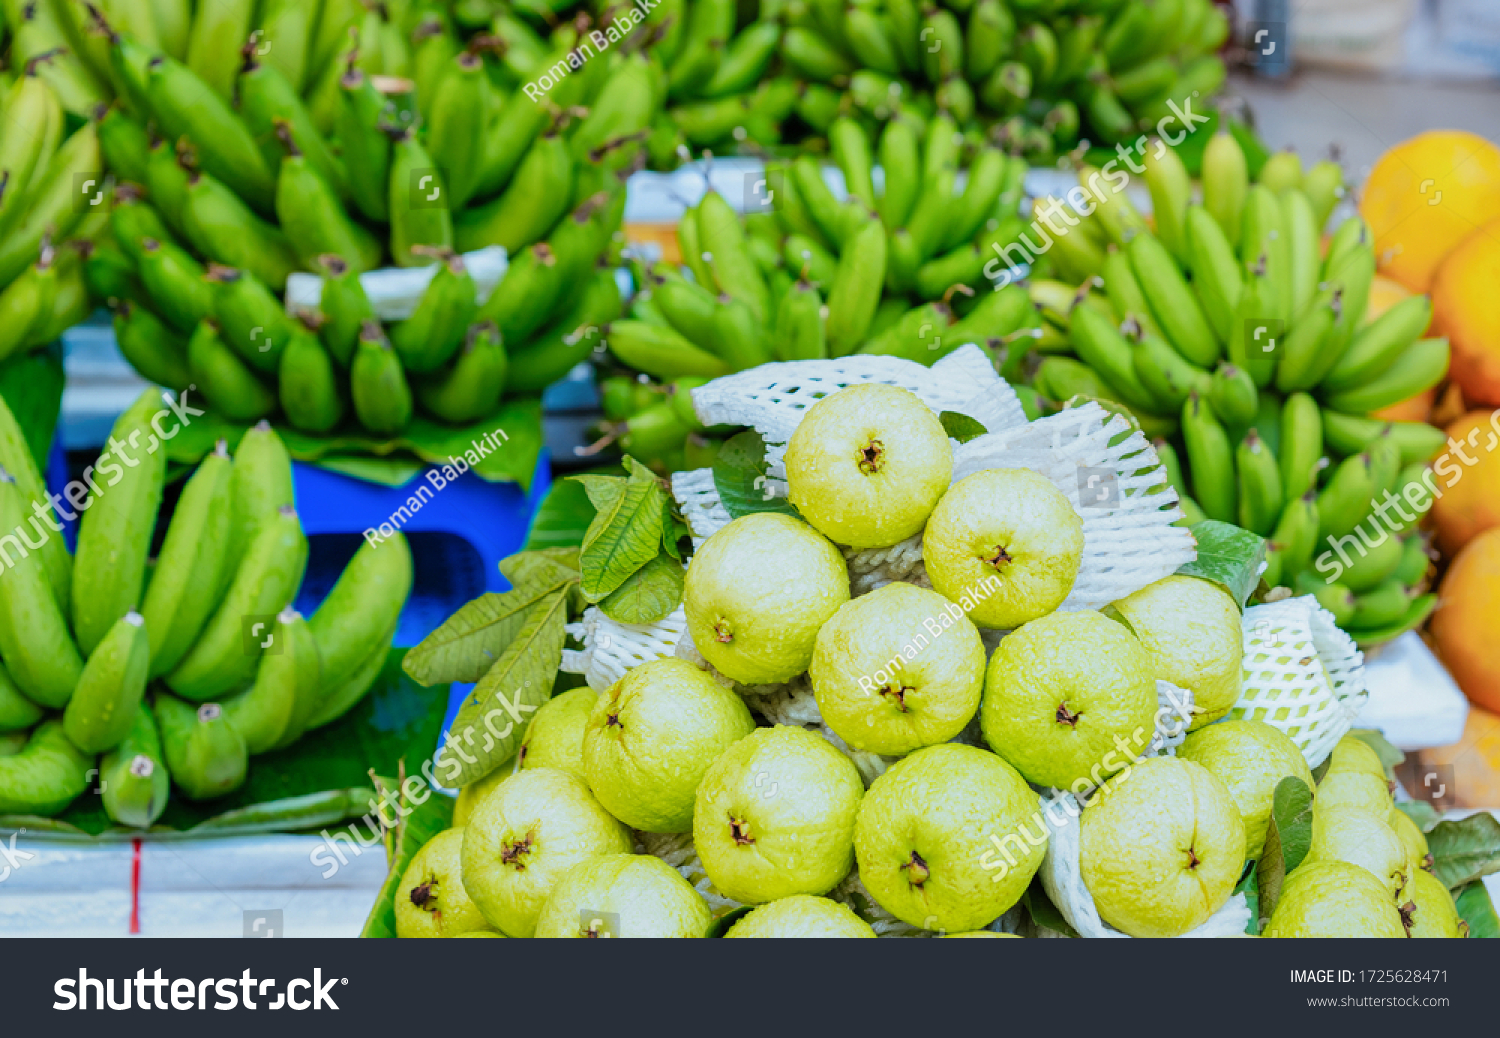 Green guava and banana fruit as Exotic tropical asian food in Hanoi in Vietnam. Street market with Vietnamese cousine. Local produce from garden. Healthy vegetarian stuff. Fruit #1725628471